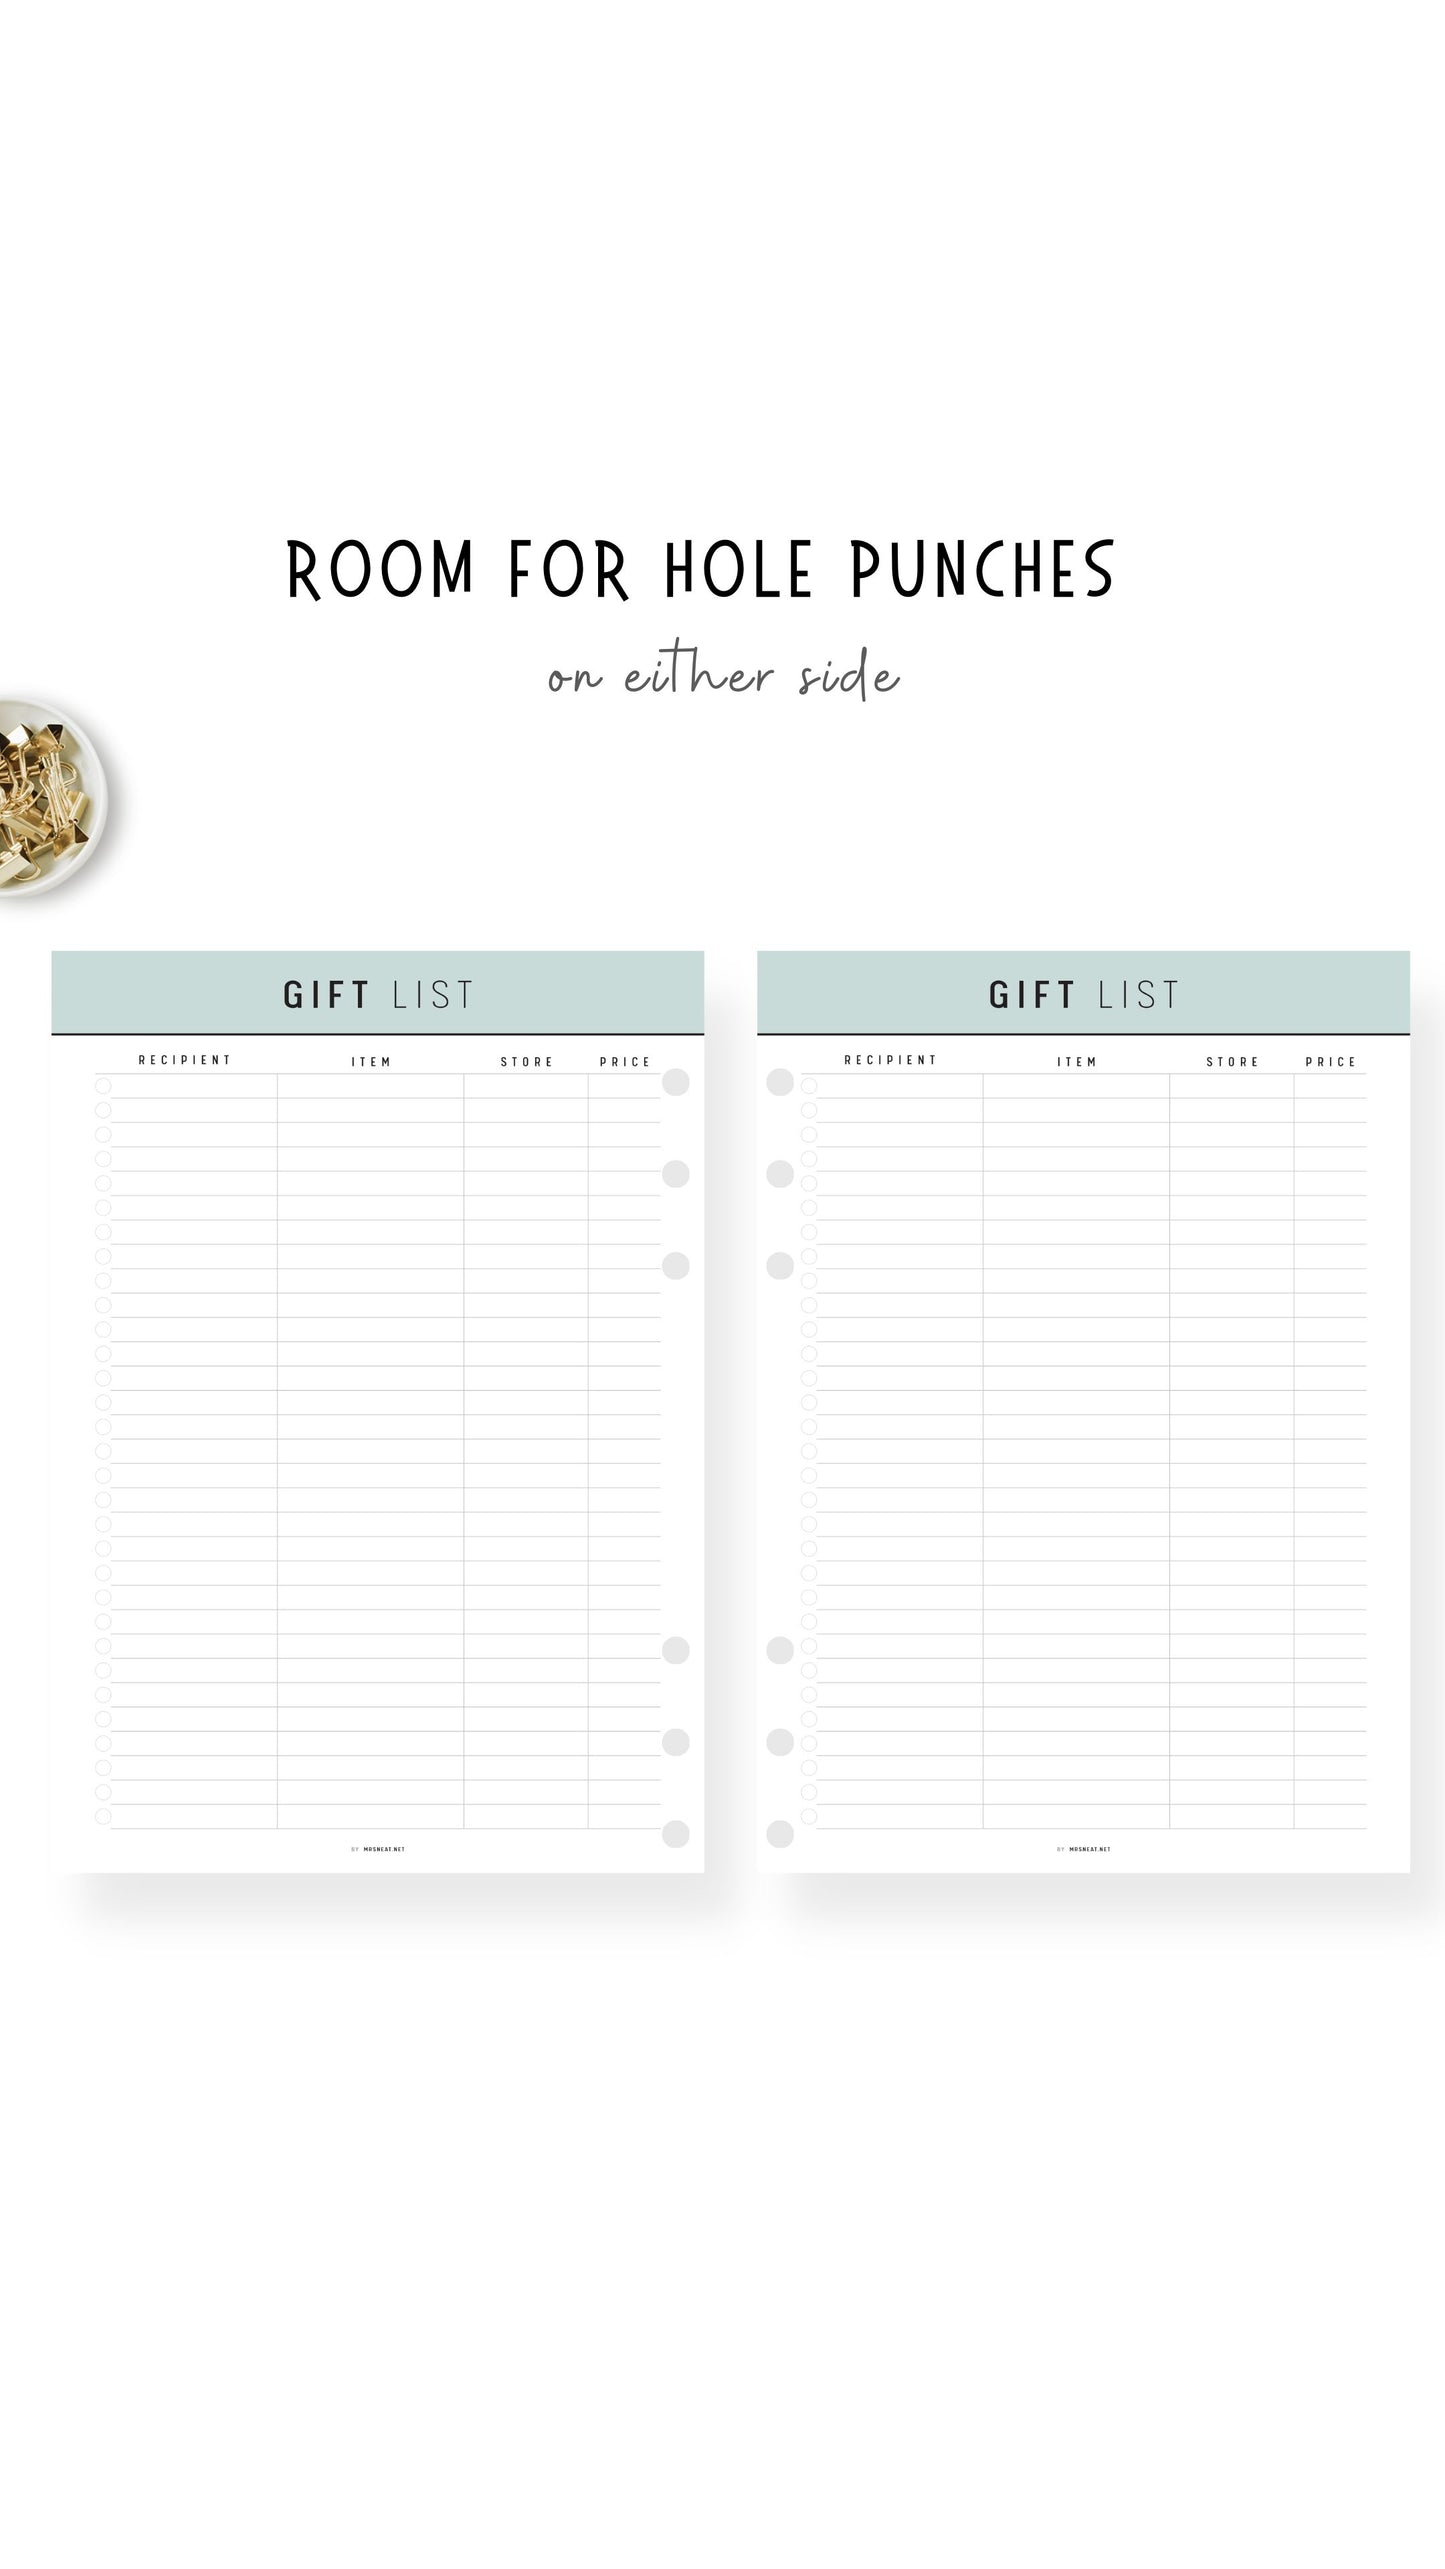 Gift List Template for Wedding